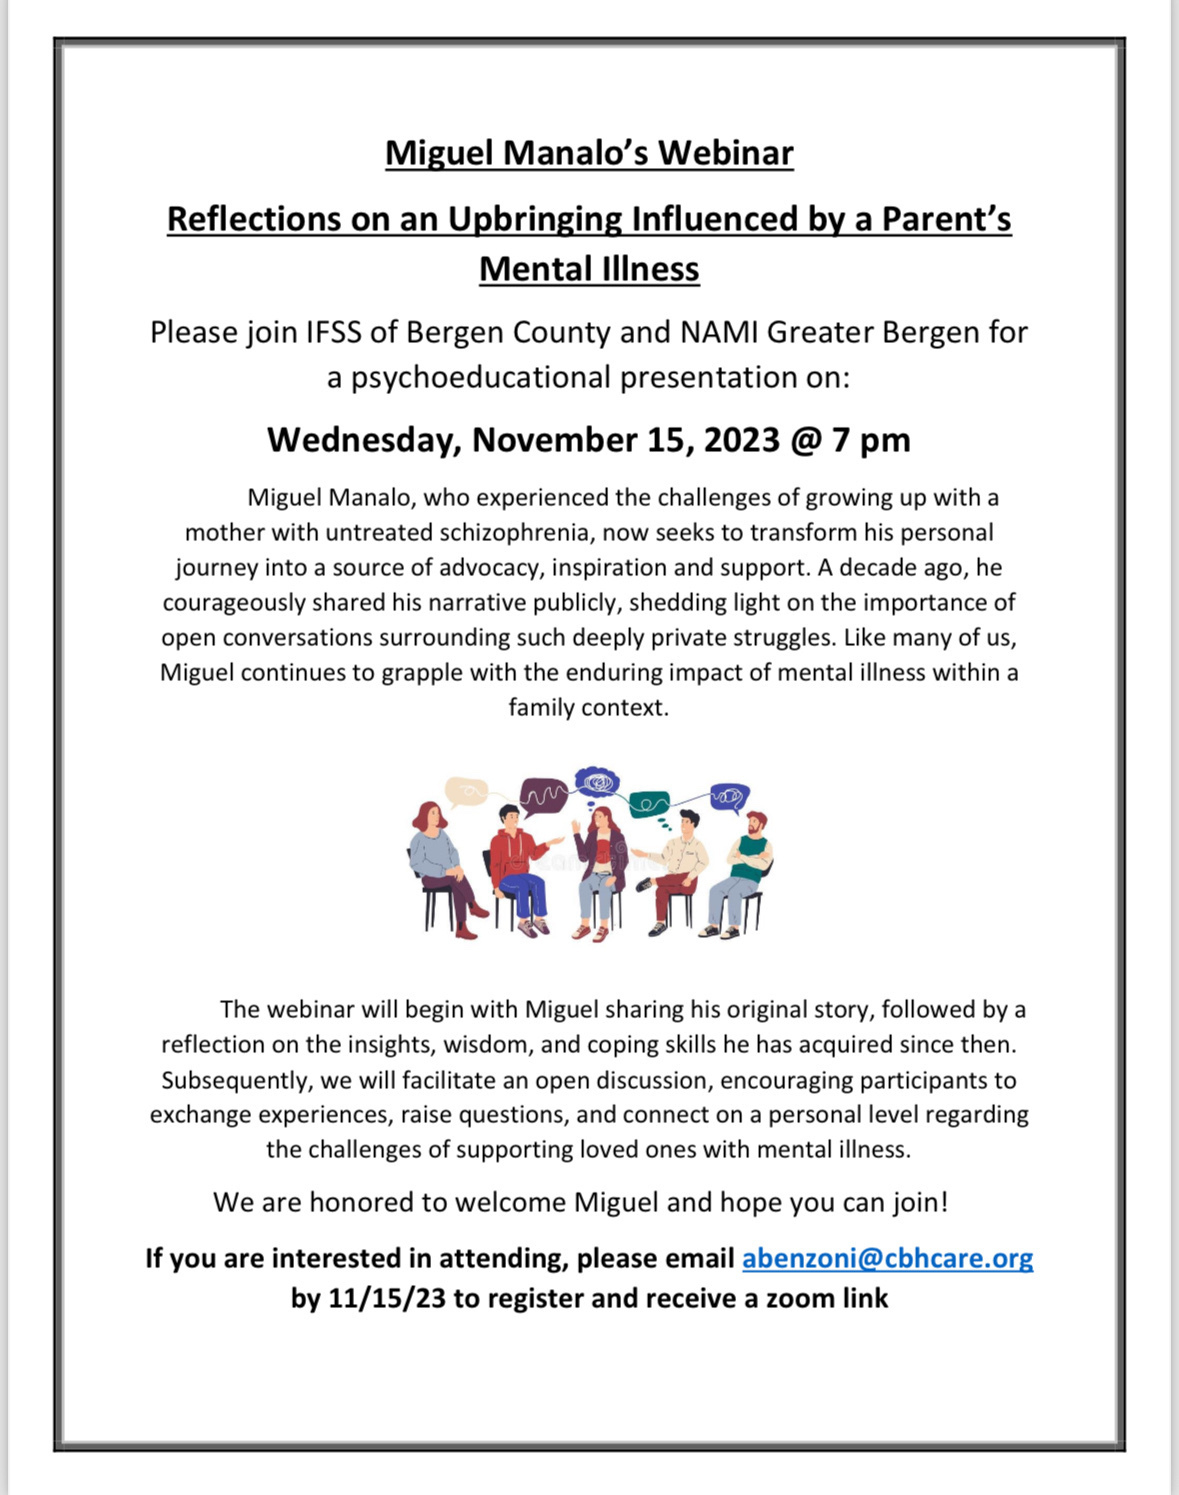 Miguel Manalo's Webinar&10;Reflections on an Upbringing Influenced by a Parent's&10;Mental Illness&10;Please join IFSS of Bergen County and NAMI Greater Bergen for a psychoeducational presentation on:&10;Wednesday, November 15, 2023 @ 7 pm&10;Miguel Manalo, who experienced the challenges of growing up with a mother with untreated schizophrenia, now seeks to transform his personal journey into a source of advocacy, inspiration and support. A decade ago, he courageously shared his narrative publicly, shedding light on the importance of open conversations surrounding such deeply private struggles. Like many of us, Miguel continues to grapple with the enduring impact of mental illness within a family context.&10;The webinar will begin with Miguel sharing his original story, followed by a reflection on the insights, wisdom, and coping skills he has acquired since then.&10;Subsequently, we will facilitate an open discussion, encouraging participants to exchange experiences, raise questions, and connect on a personal level regarding the challenges of supporting loved ones with mental illness.&10;We are honored to welcome Miguel and hope you can join!&10;If you are interested in attending, please email abenzoni@chcare.org&10;by 11/15/23 to register and receive a zoom link